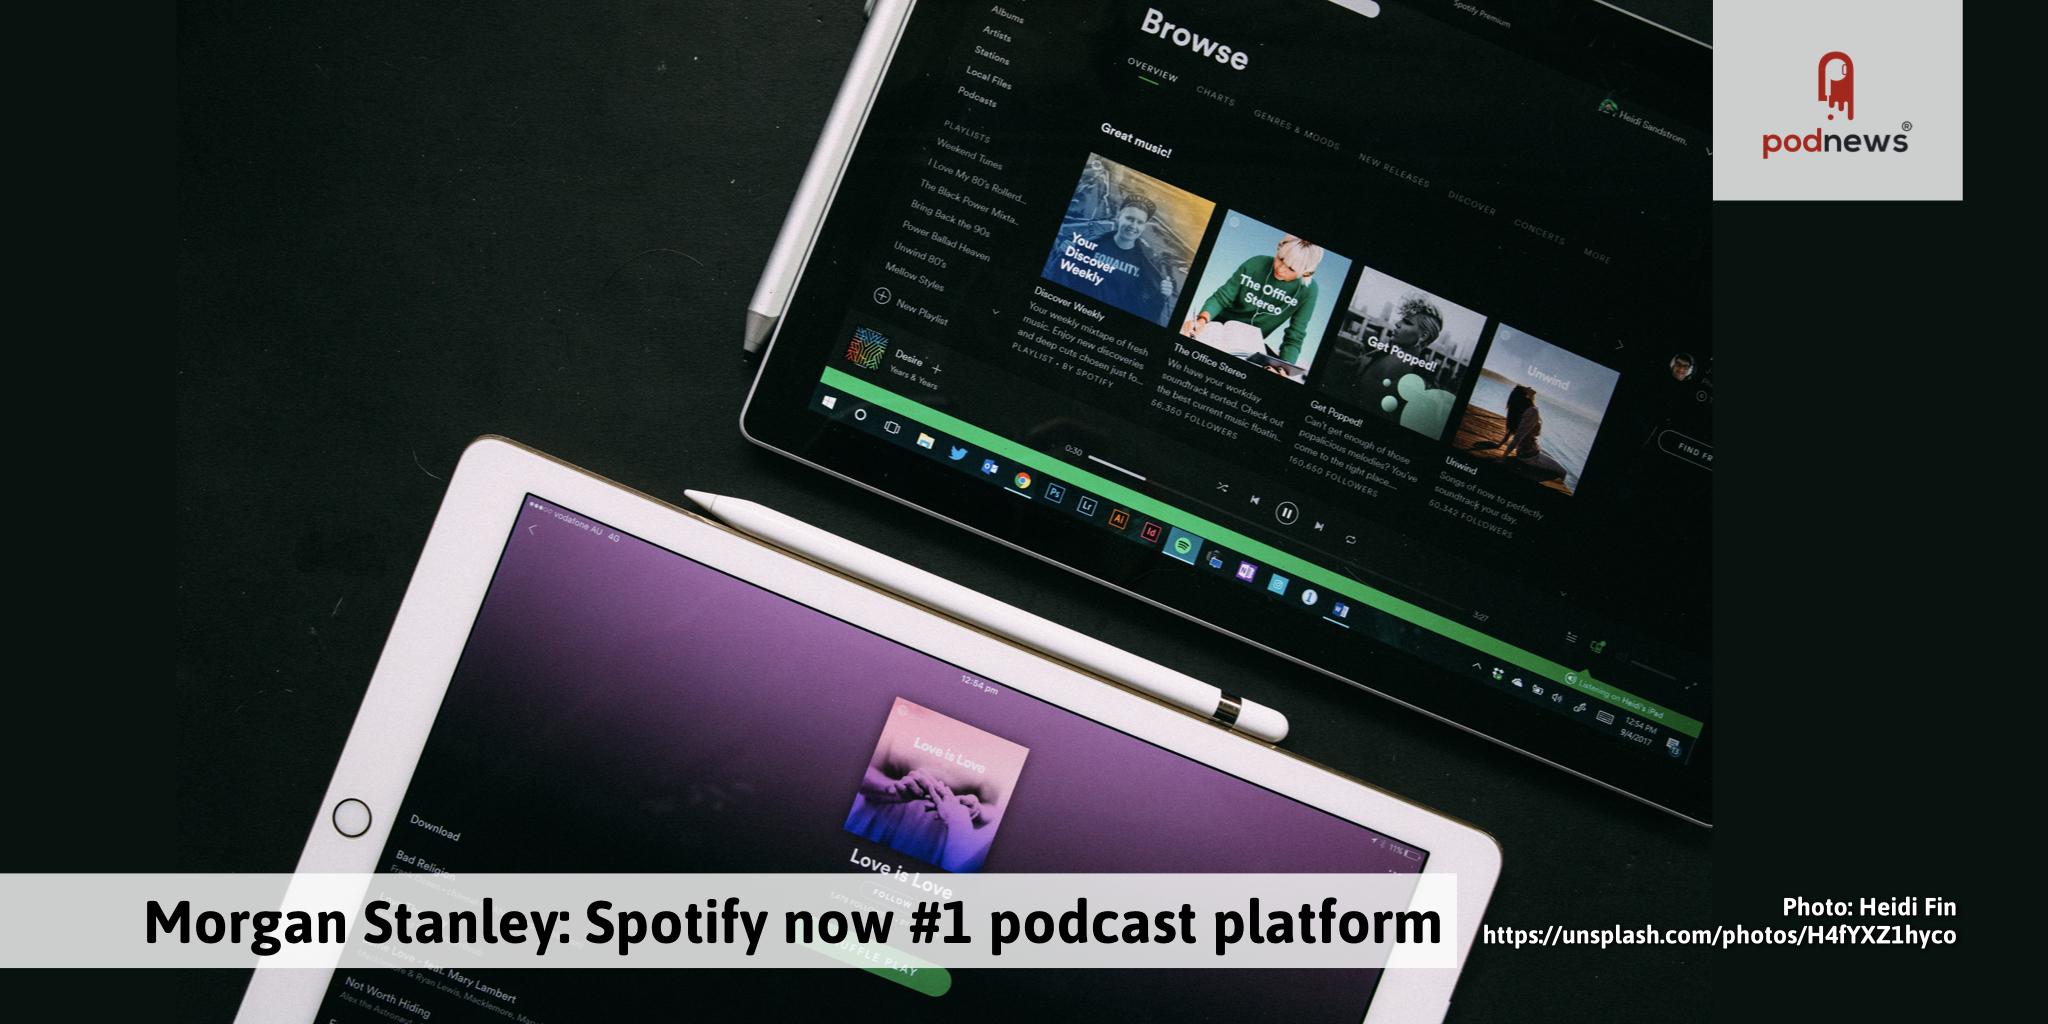 Morgan Stanley Spotify Is Now 1 Podcast Platform Beating Apple